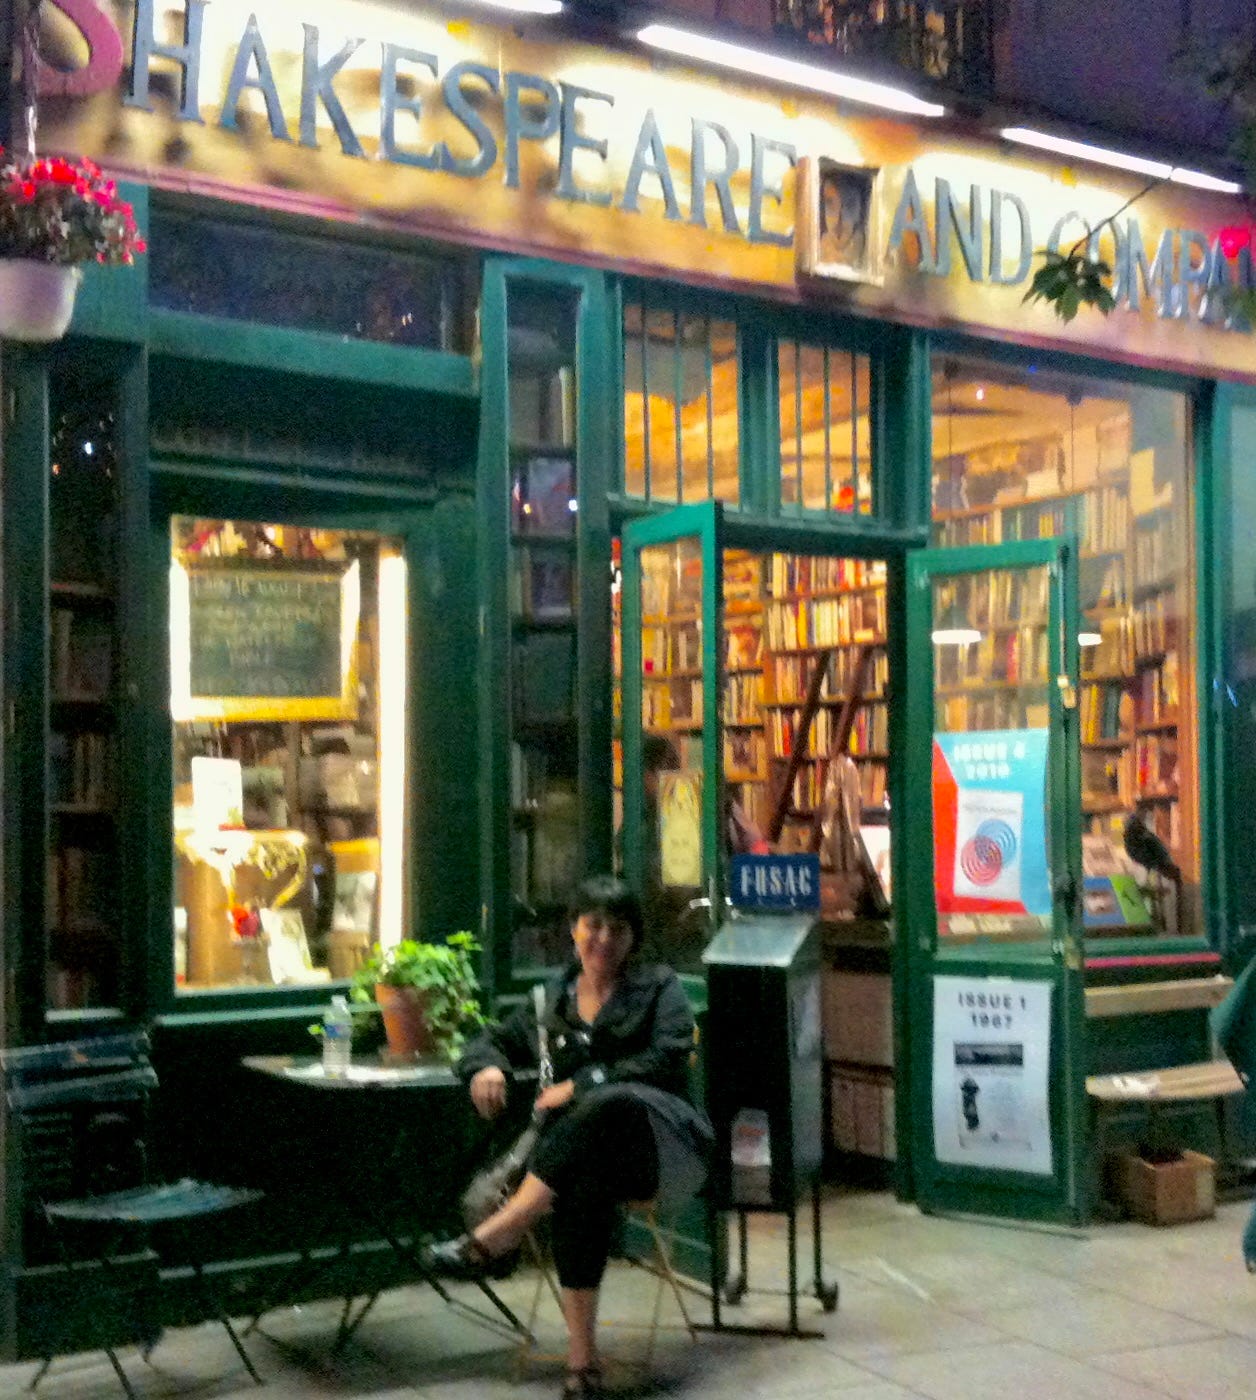 Playwright, Bianca Bagatourian in front of the Shakespeare & Co bookstore in Paris